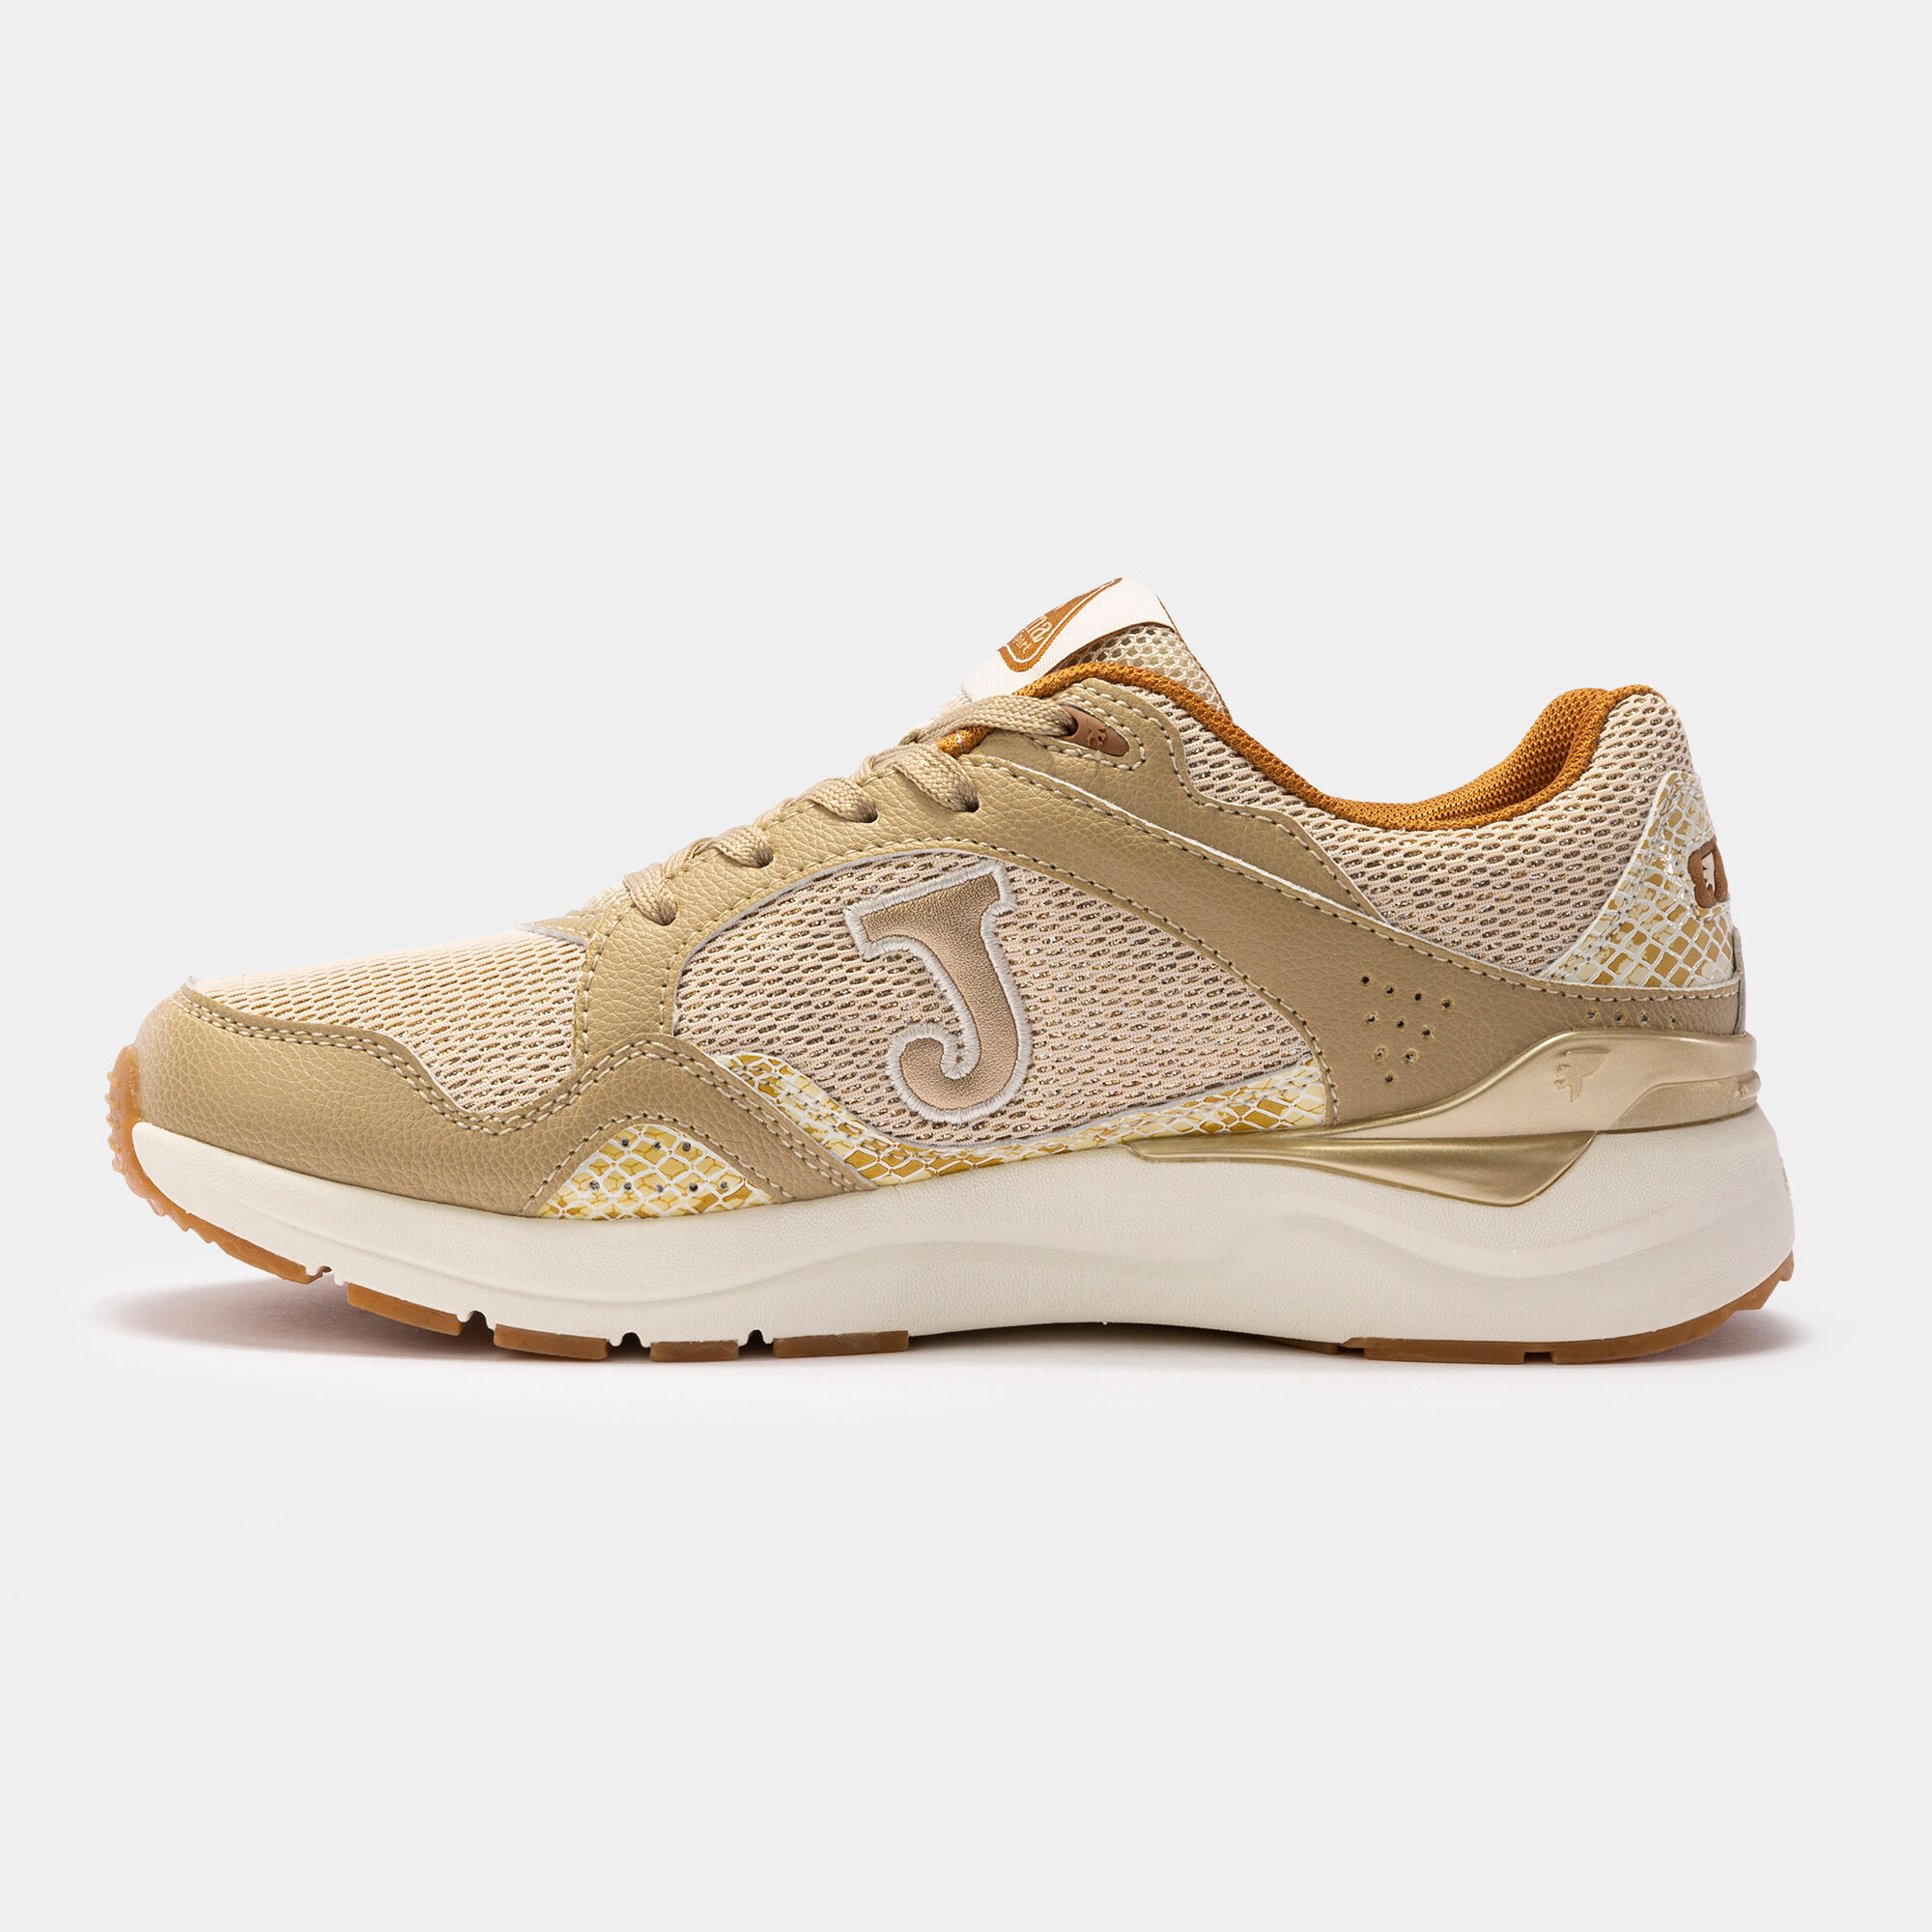 CHAUSSURES CASUAL C.6100 22 FEMME BEIGE